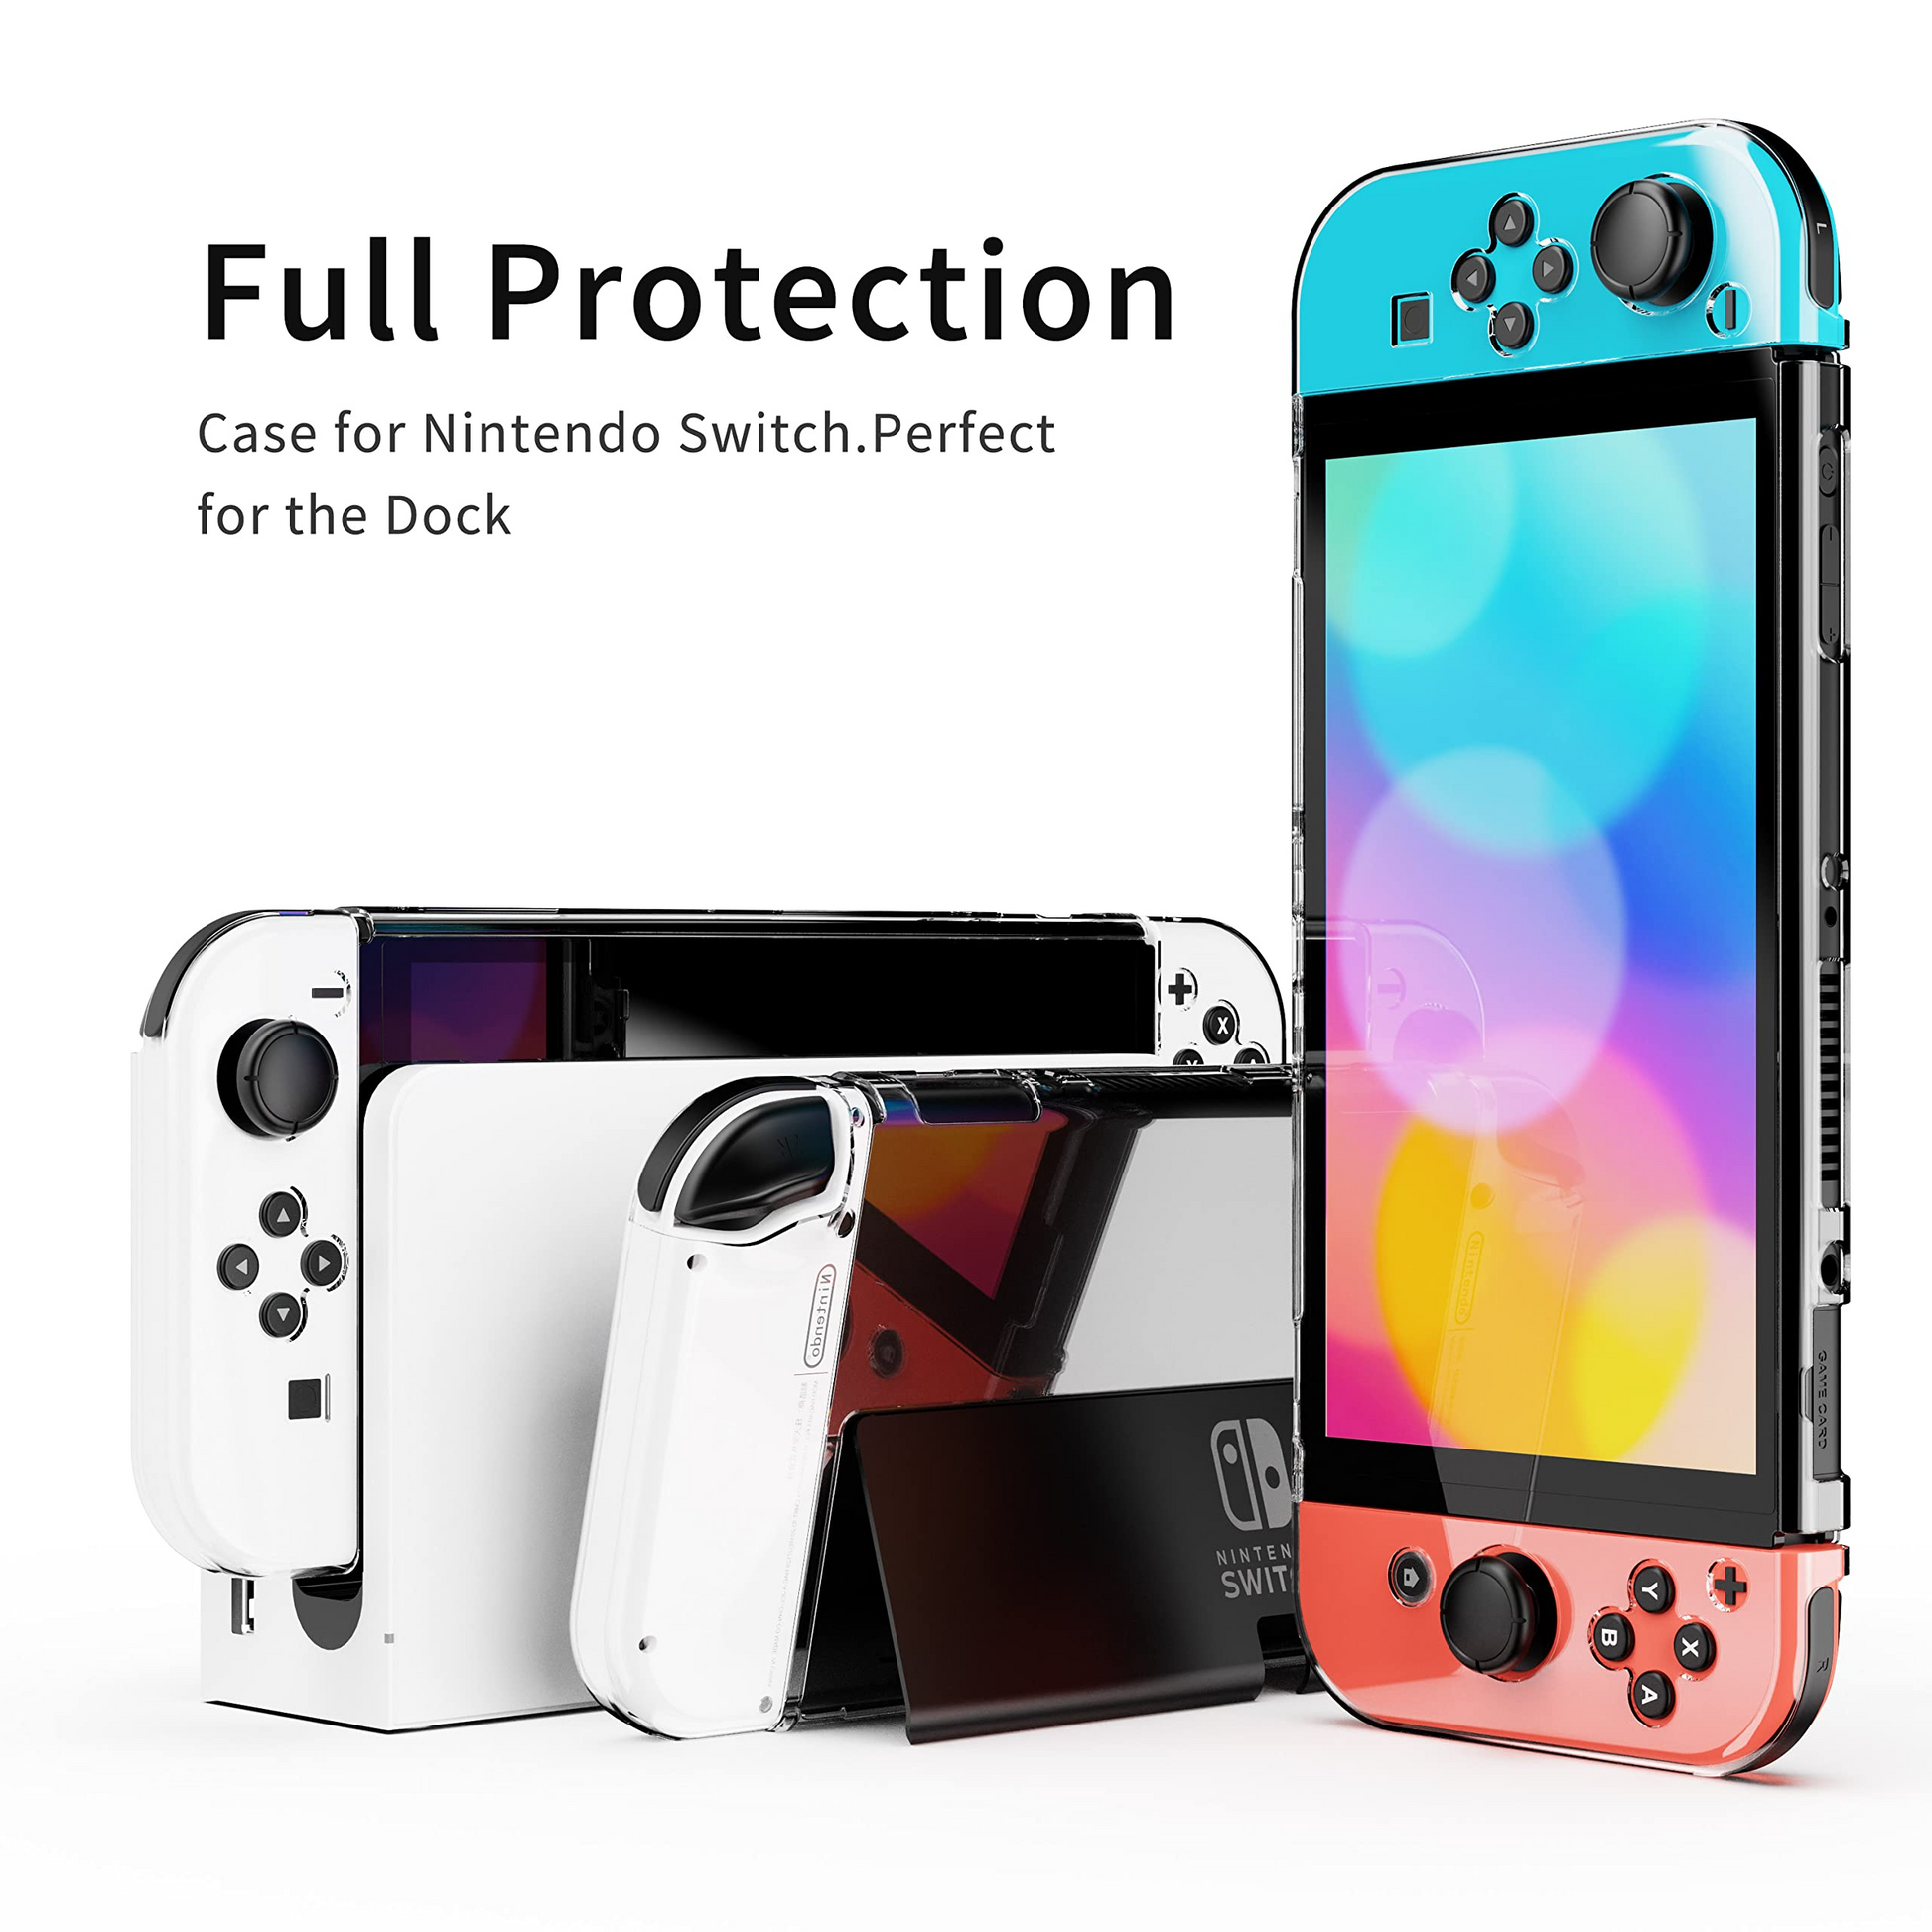  [21 in 1] Benazcap Accessories Kit Compatible with Nintendo  Switch OLED, Travel Accessory Bundle with Carry Case Screen Protector  Joy-con Grips & More : Video Games